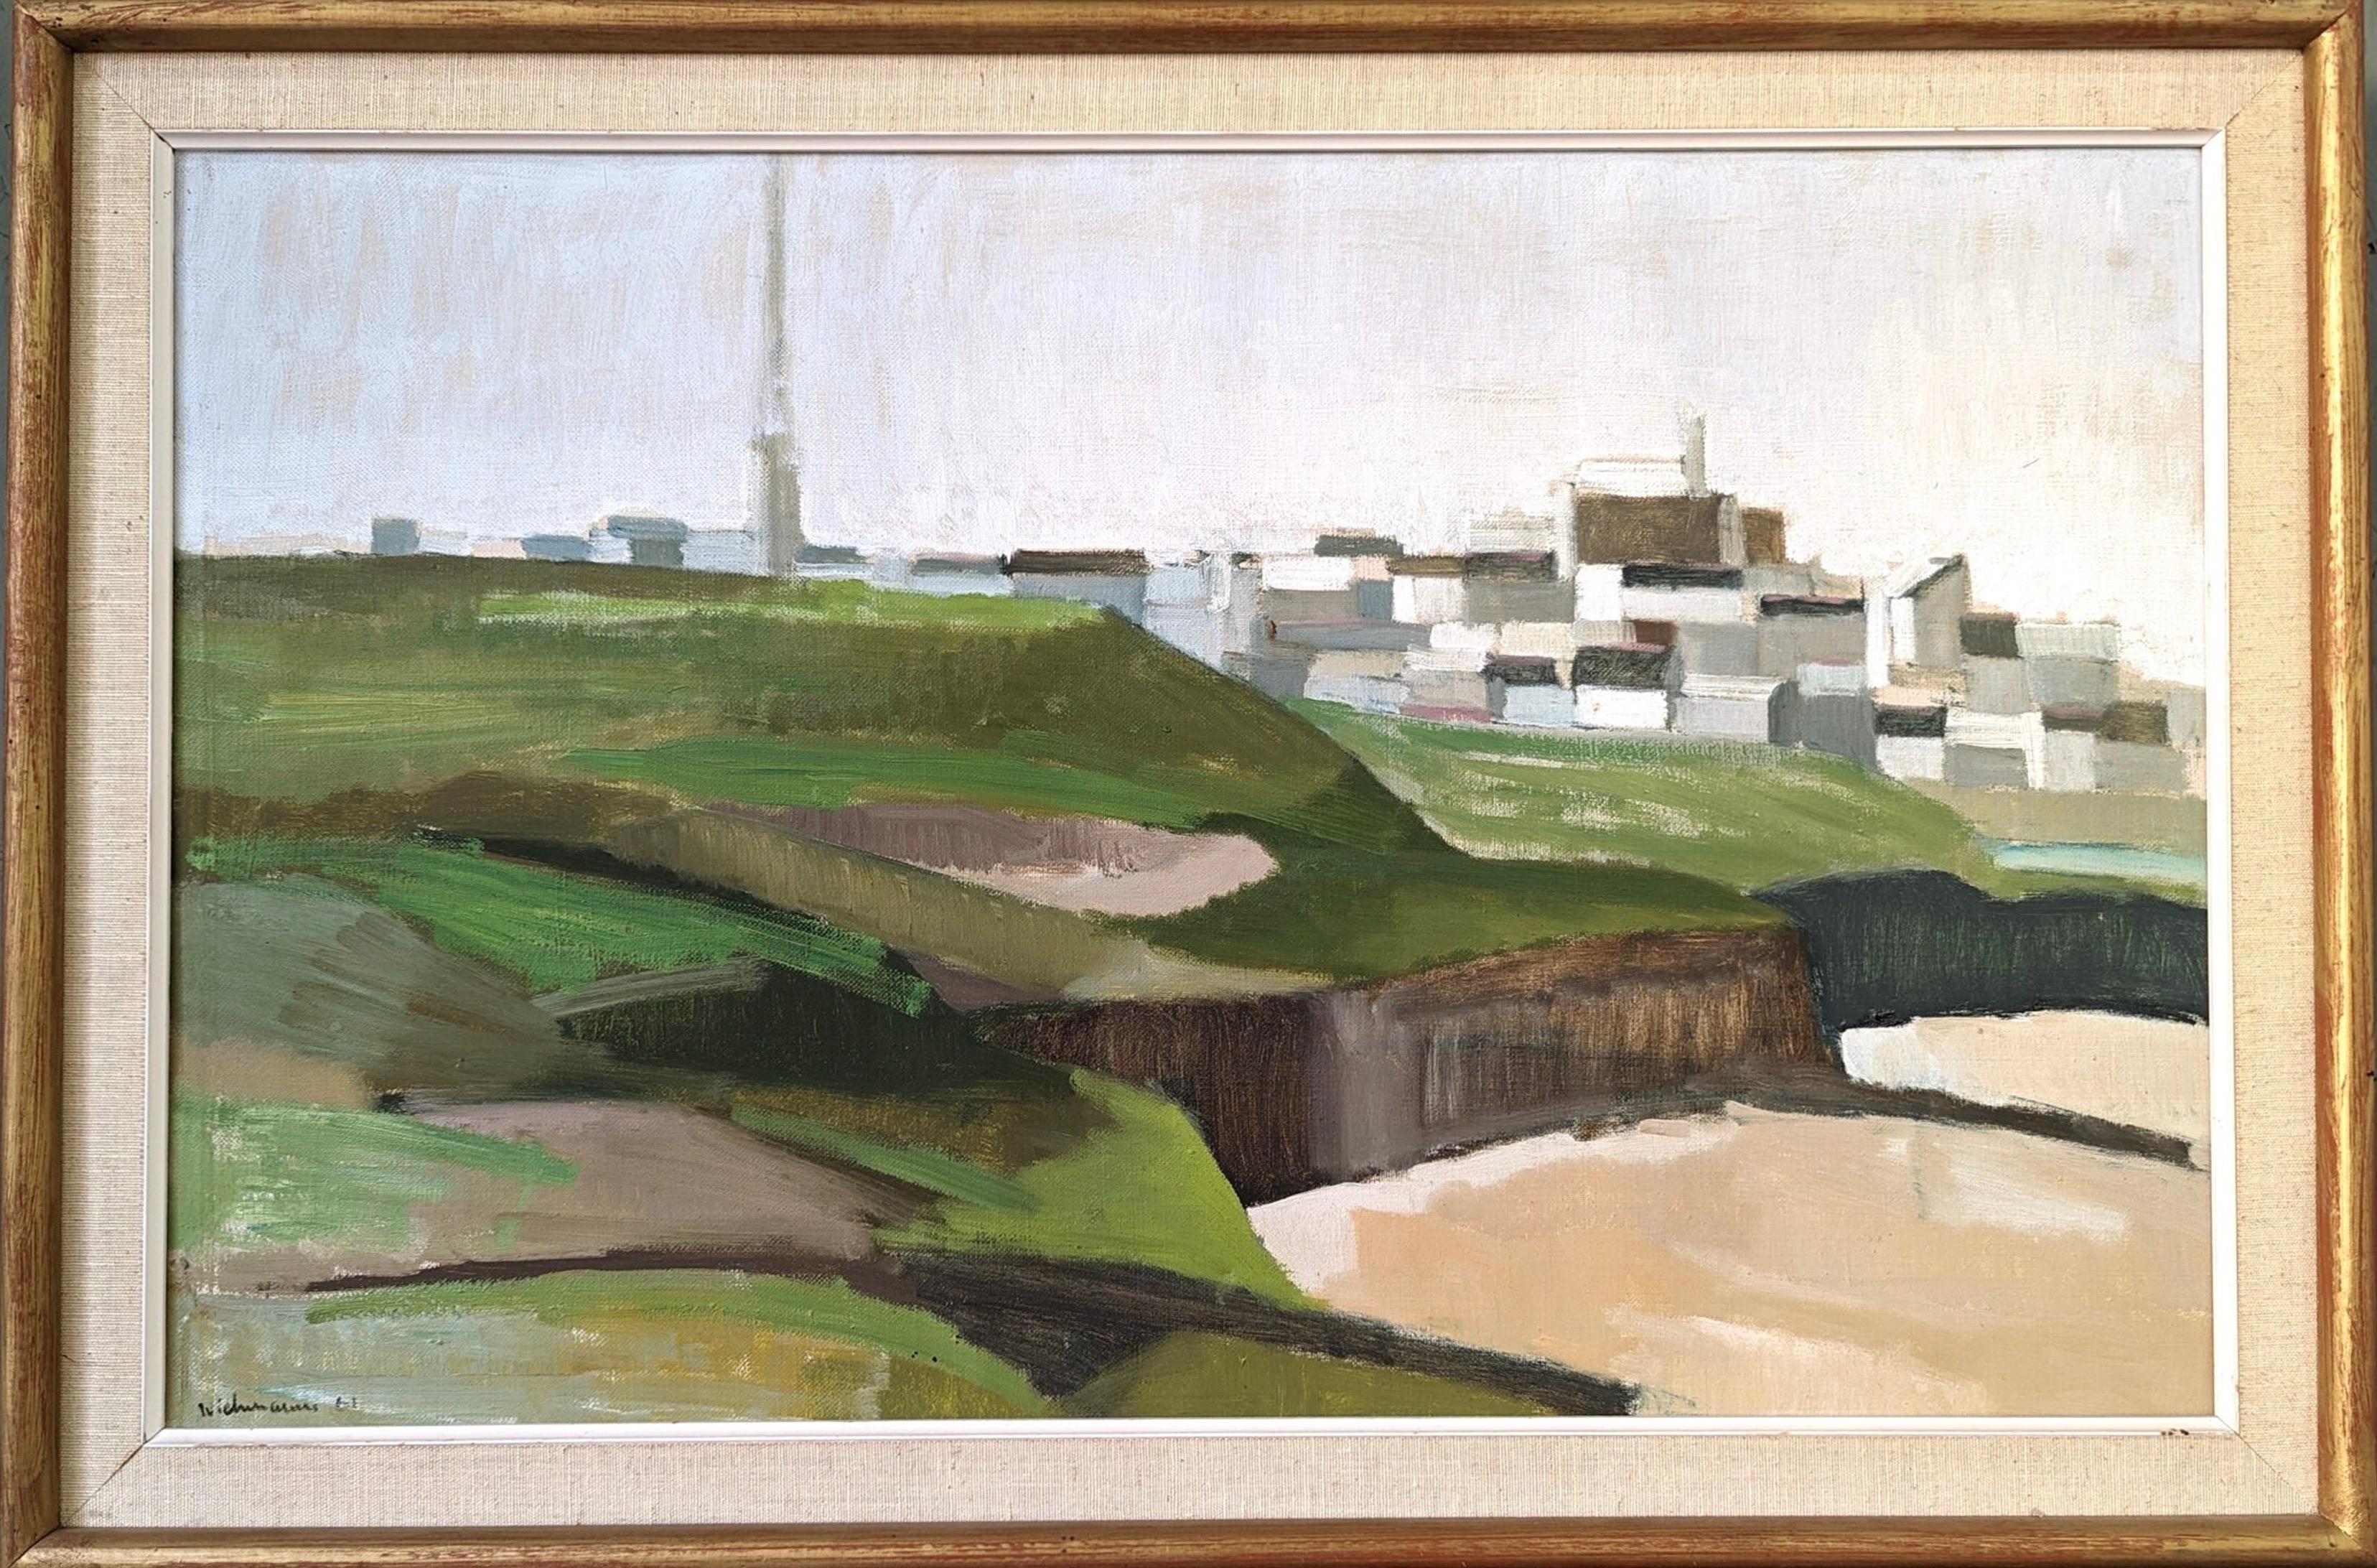 Unknown Landscape Painting - 1961 Vintage Mid-Century Expressionist City Landscape Oil Painting - Brittany